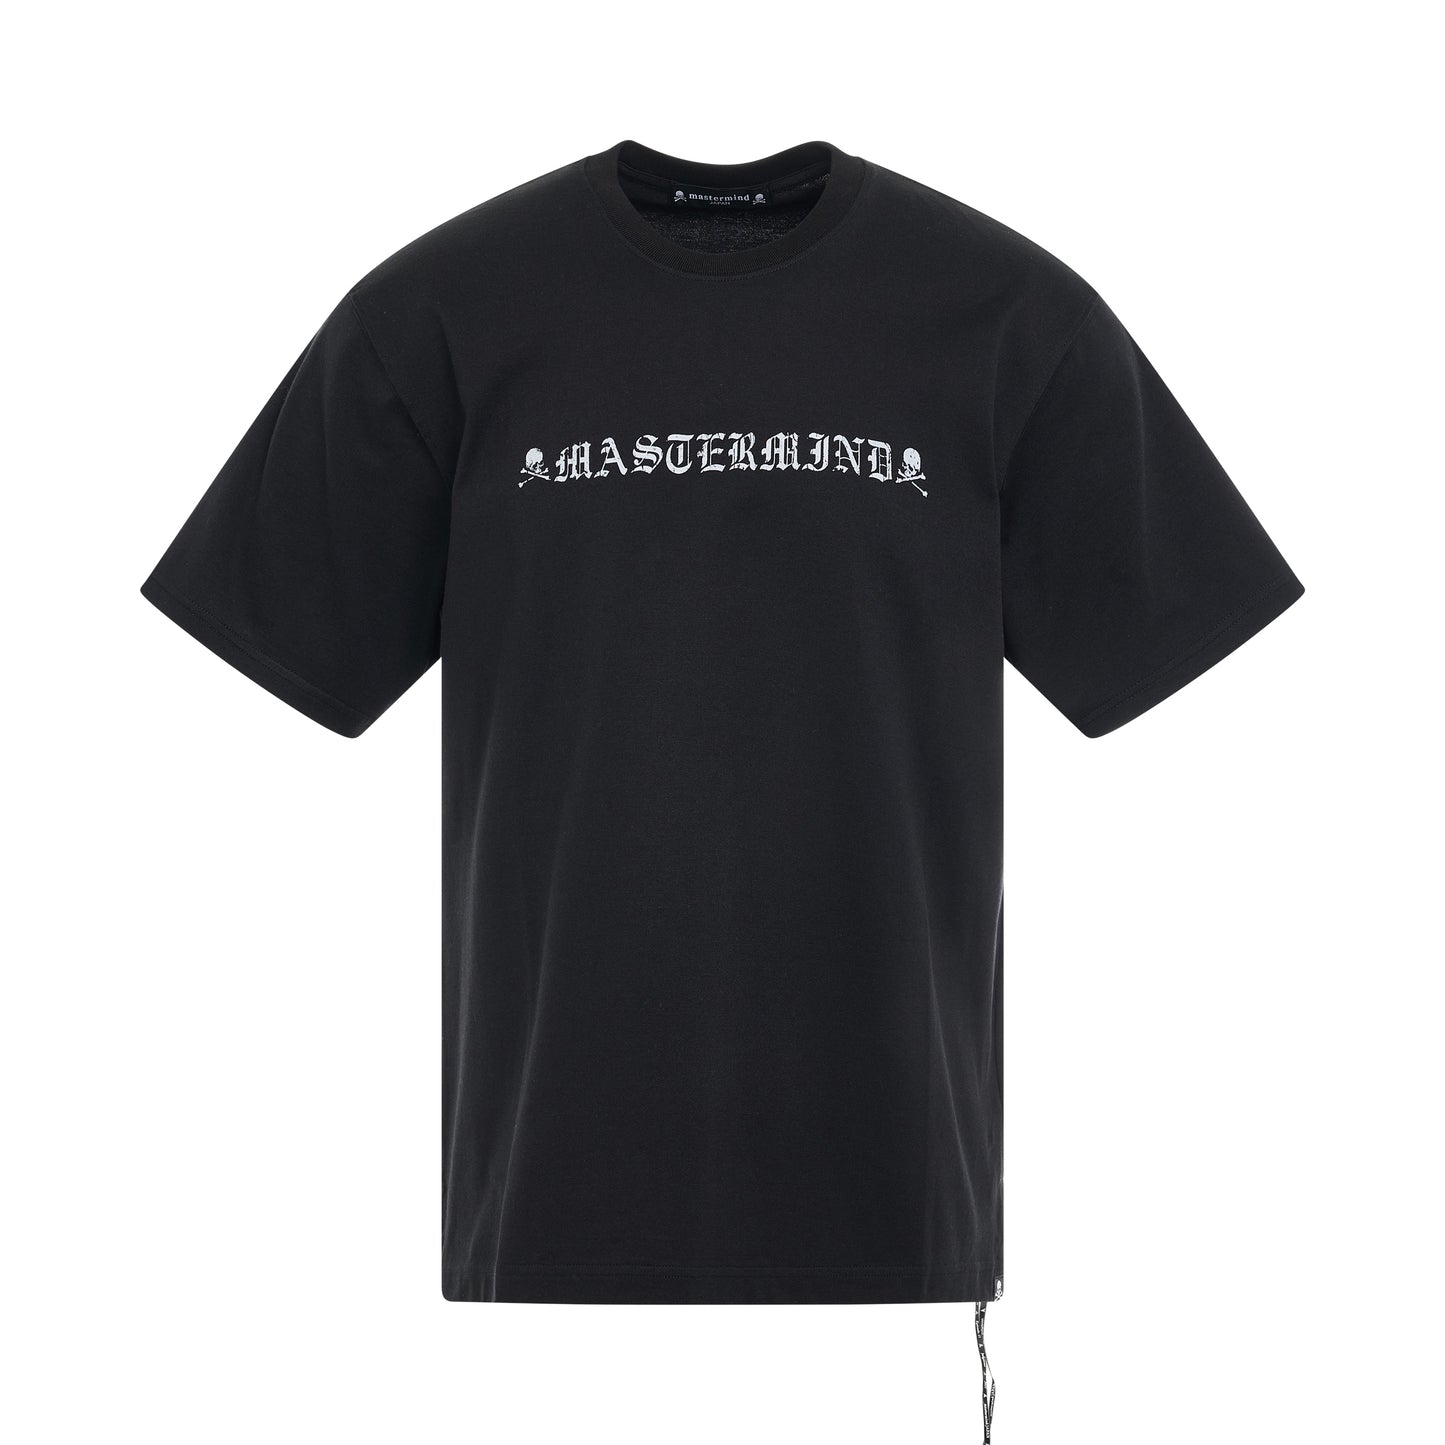 Rubbed Logo T-Shirt in Black